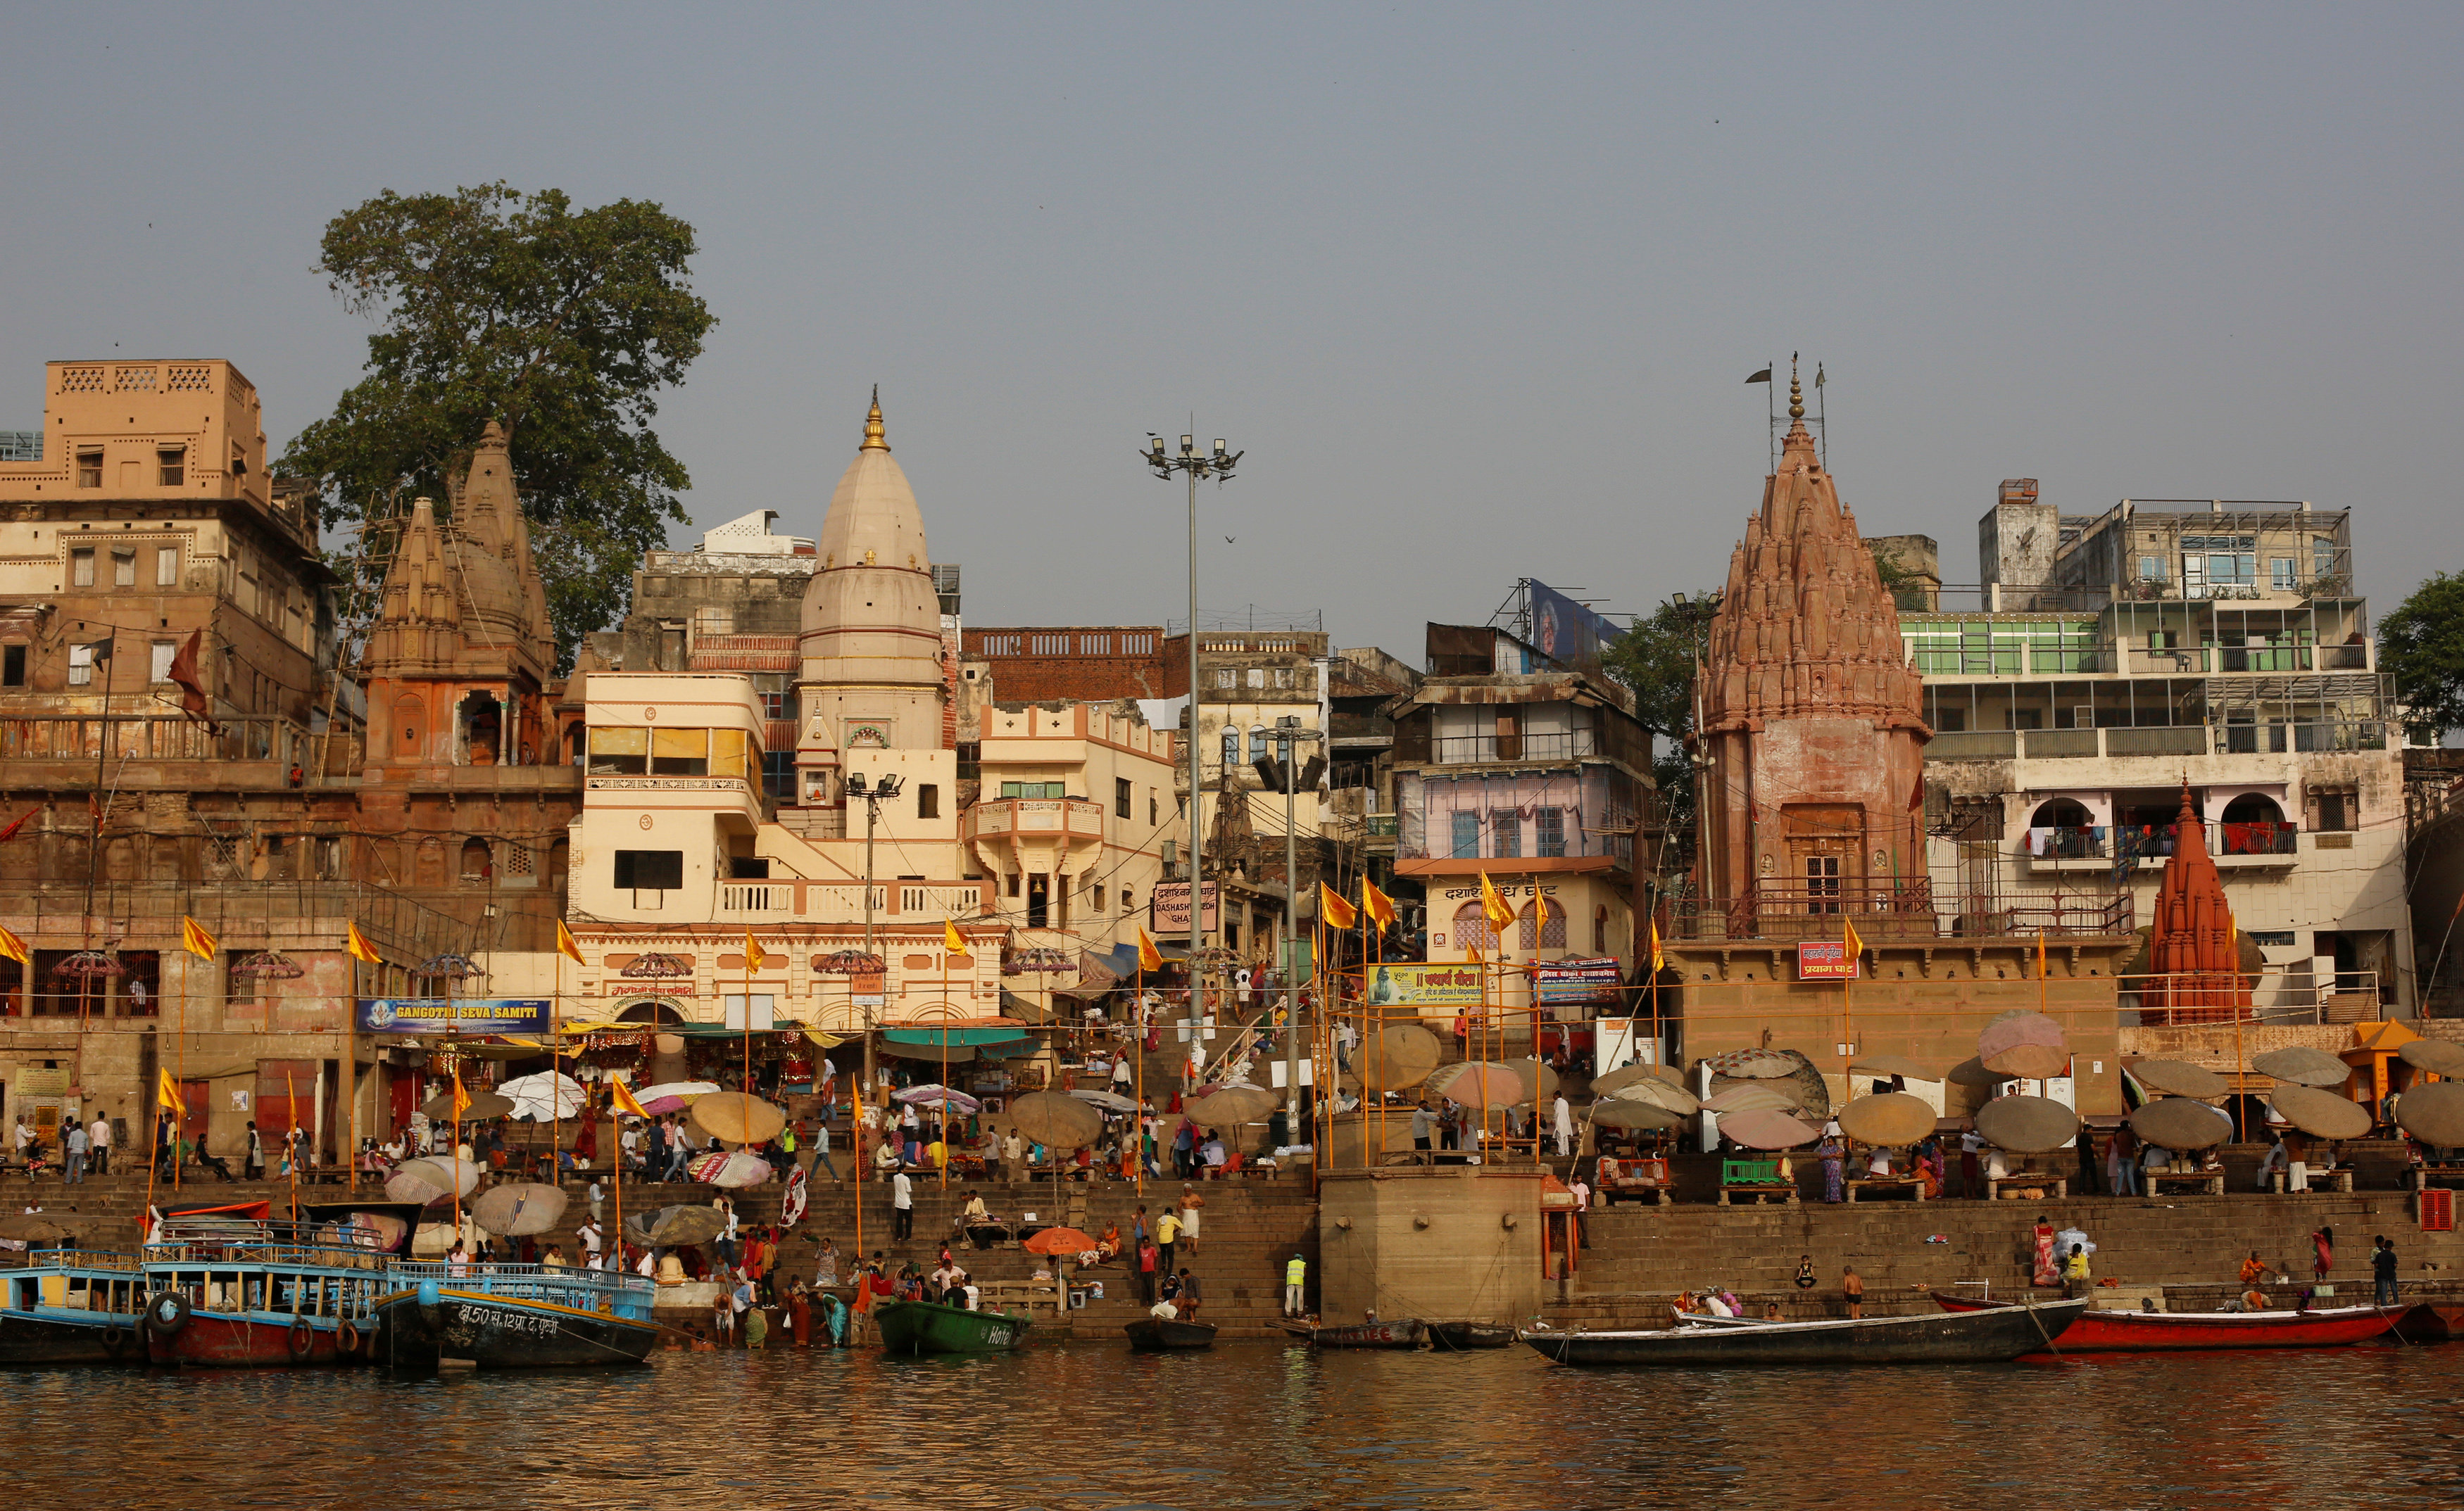 India's holy river Ganga succumbing to pollution